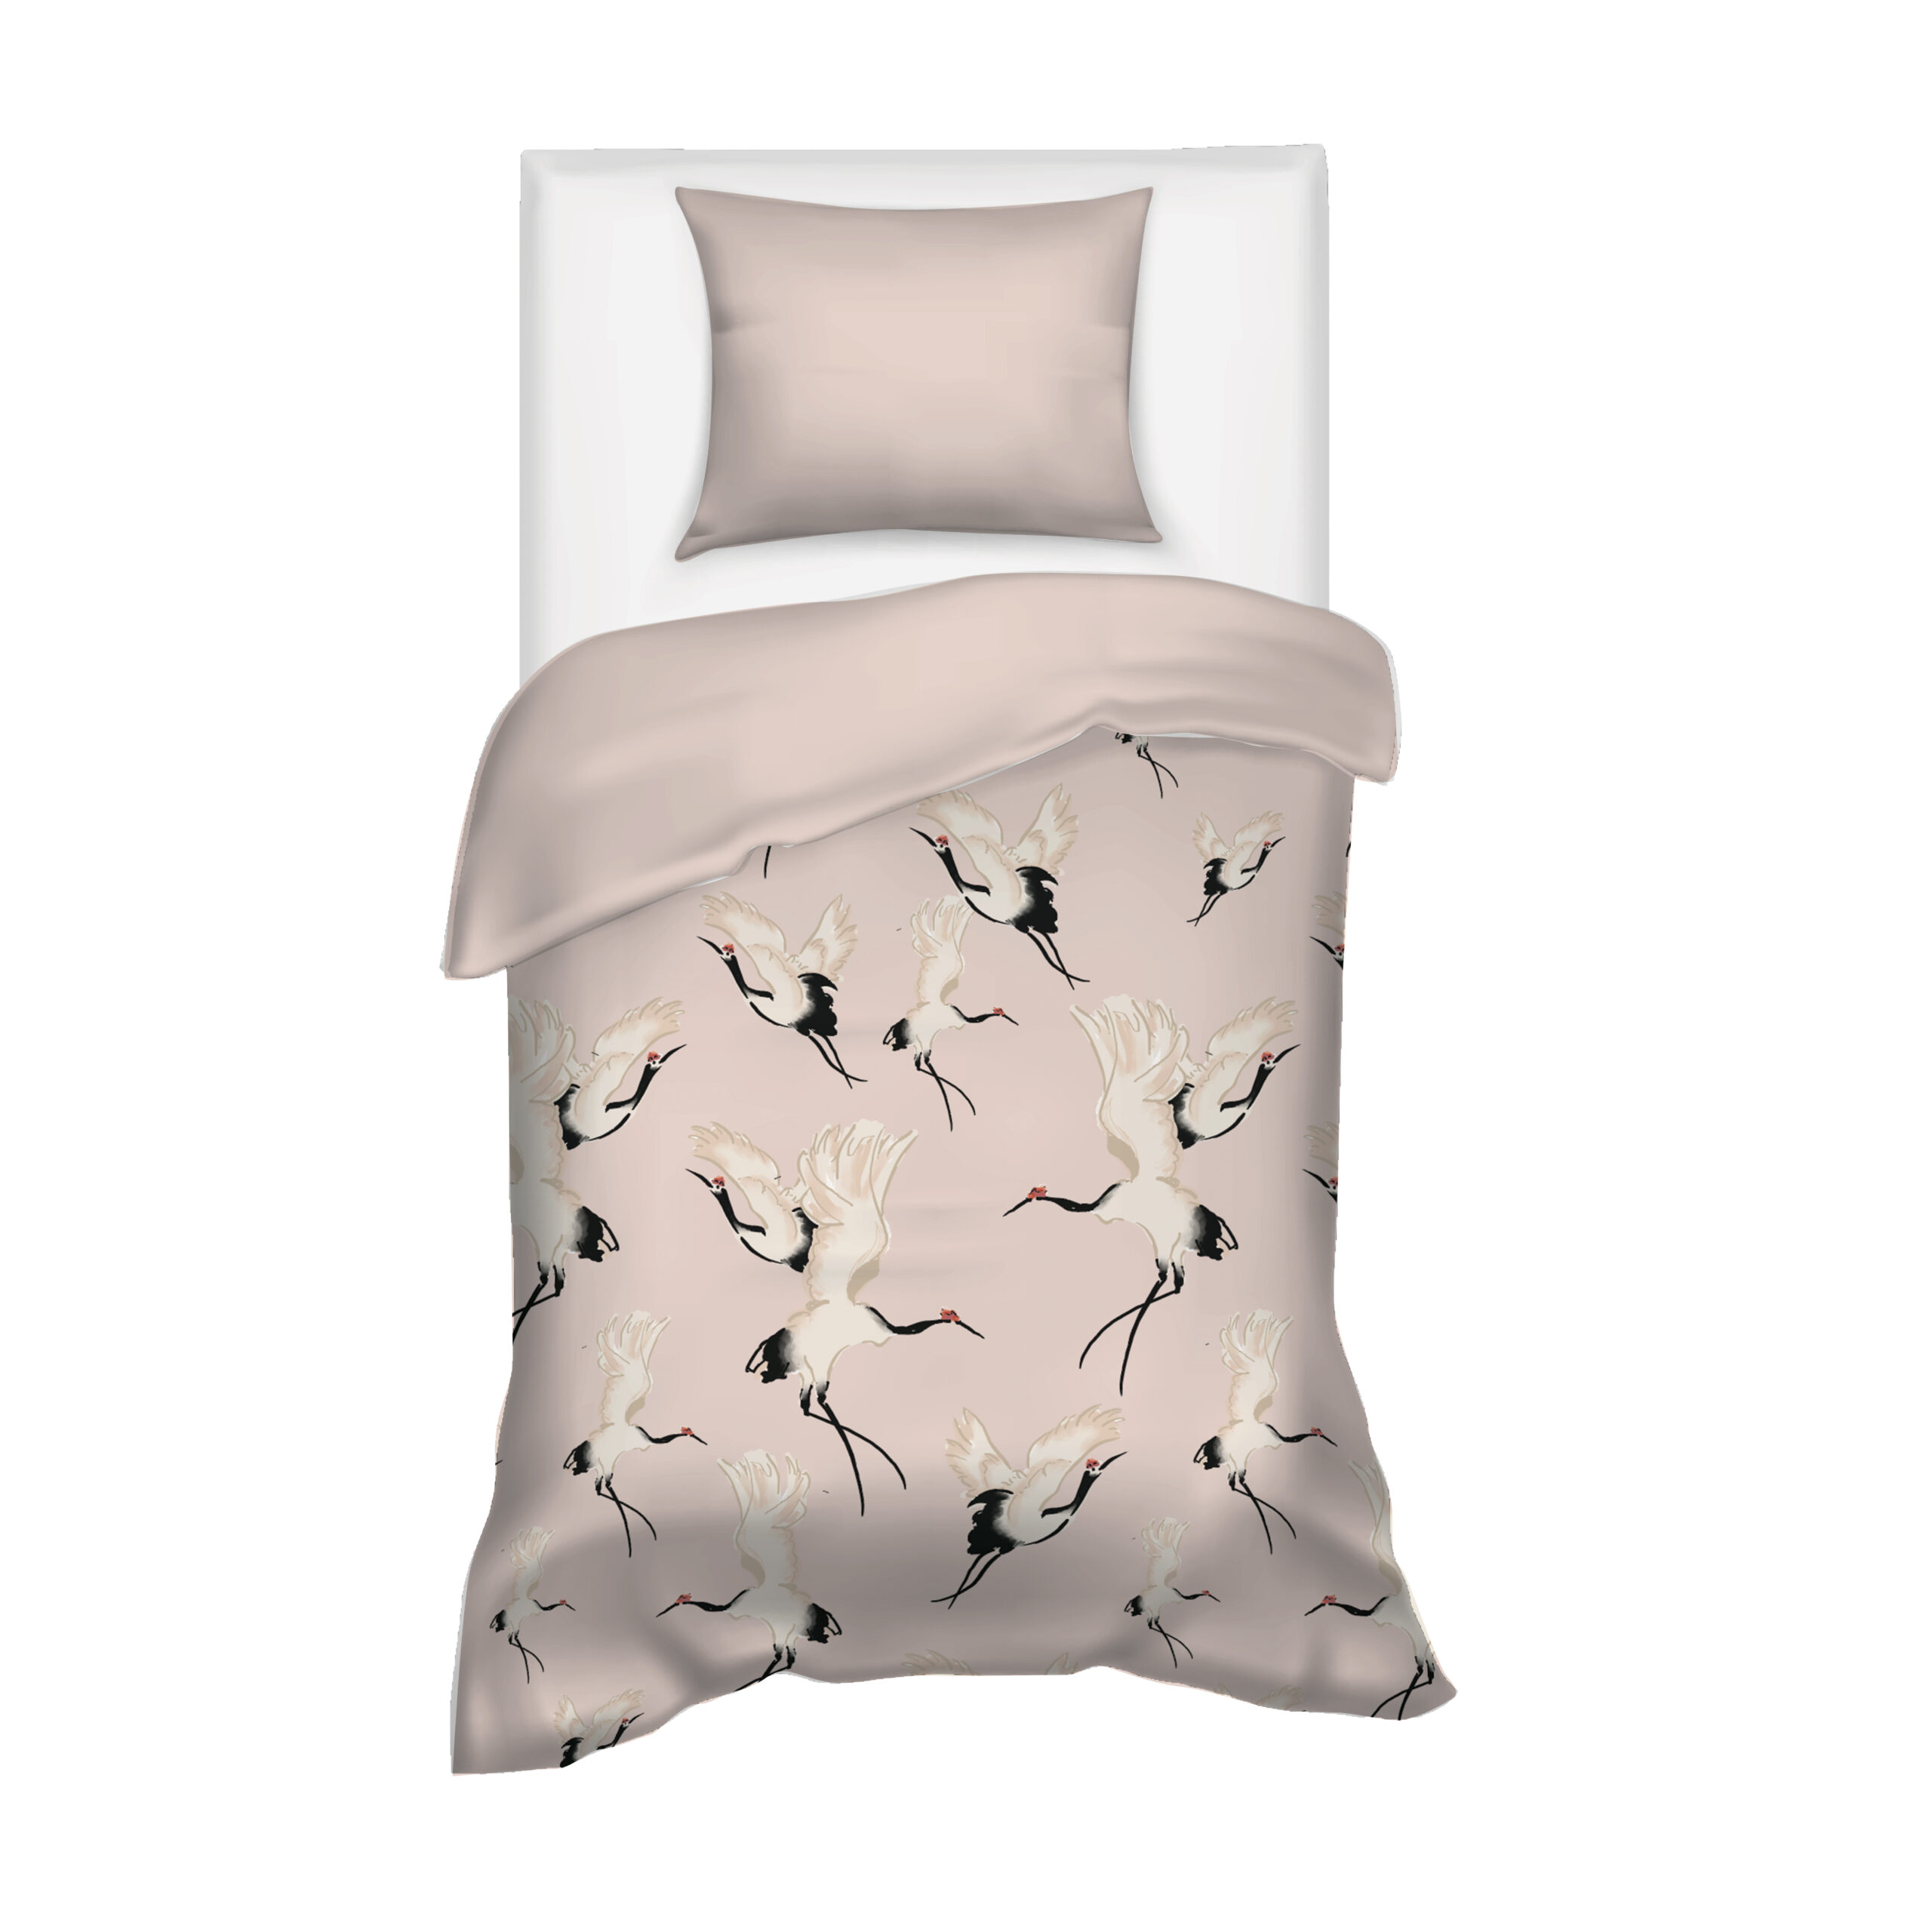 villa-madelief-140-x-200cm-pink-white-cranes-printed-duvet-cover-with-1-pillowcase